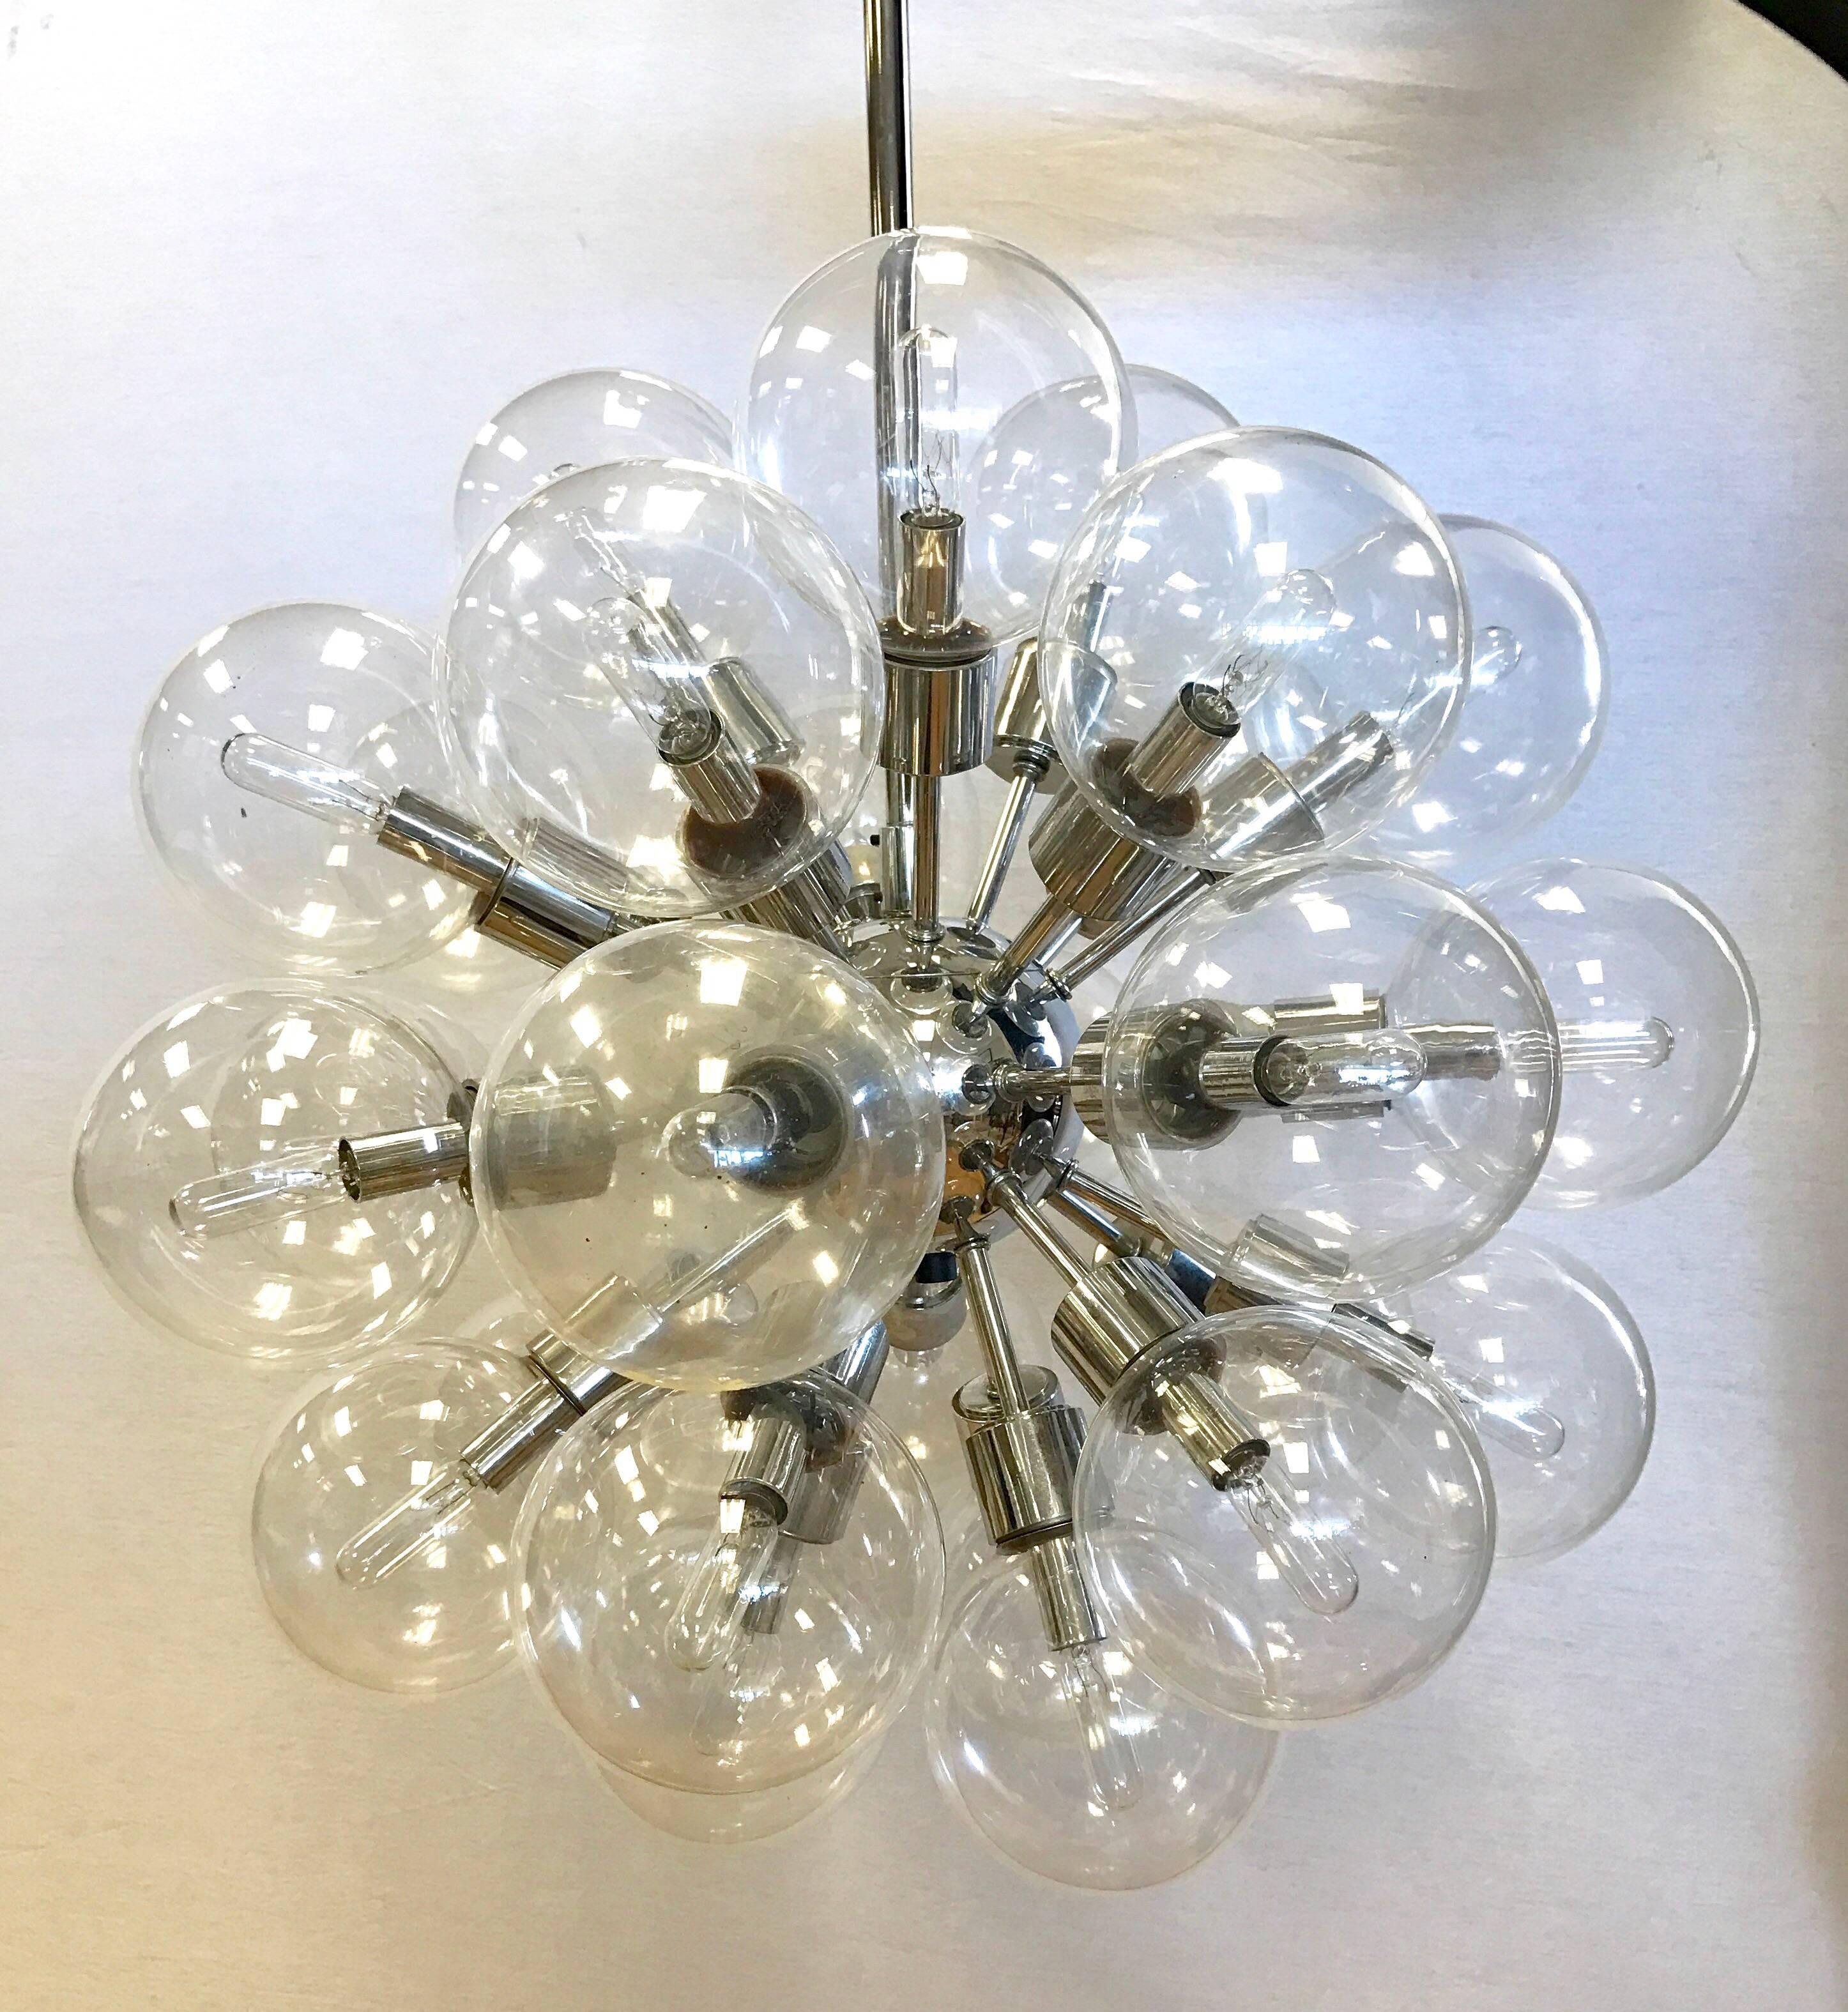 Rare set of four matching Mid-Century Modern Lightolier 30-light sputnik chandeliers, circa 1960s. Feature 30 original glass globes on polished chrome spokes radiating from a central chrome nucleus. They are made of polished chrome and has some